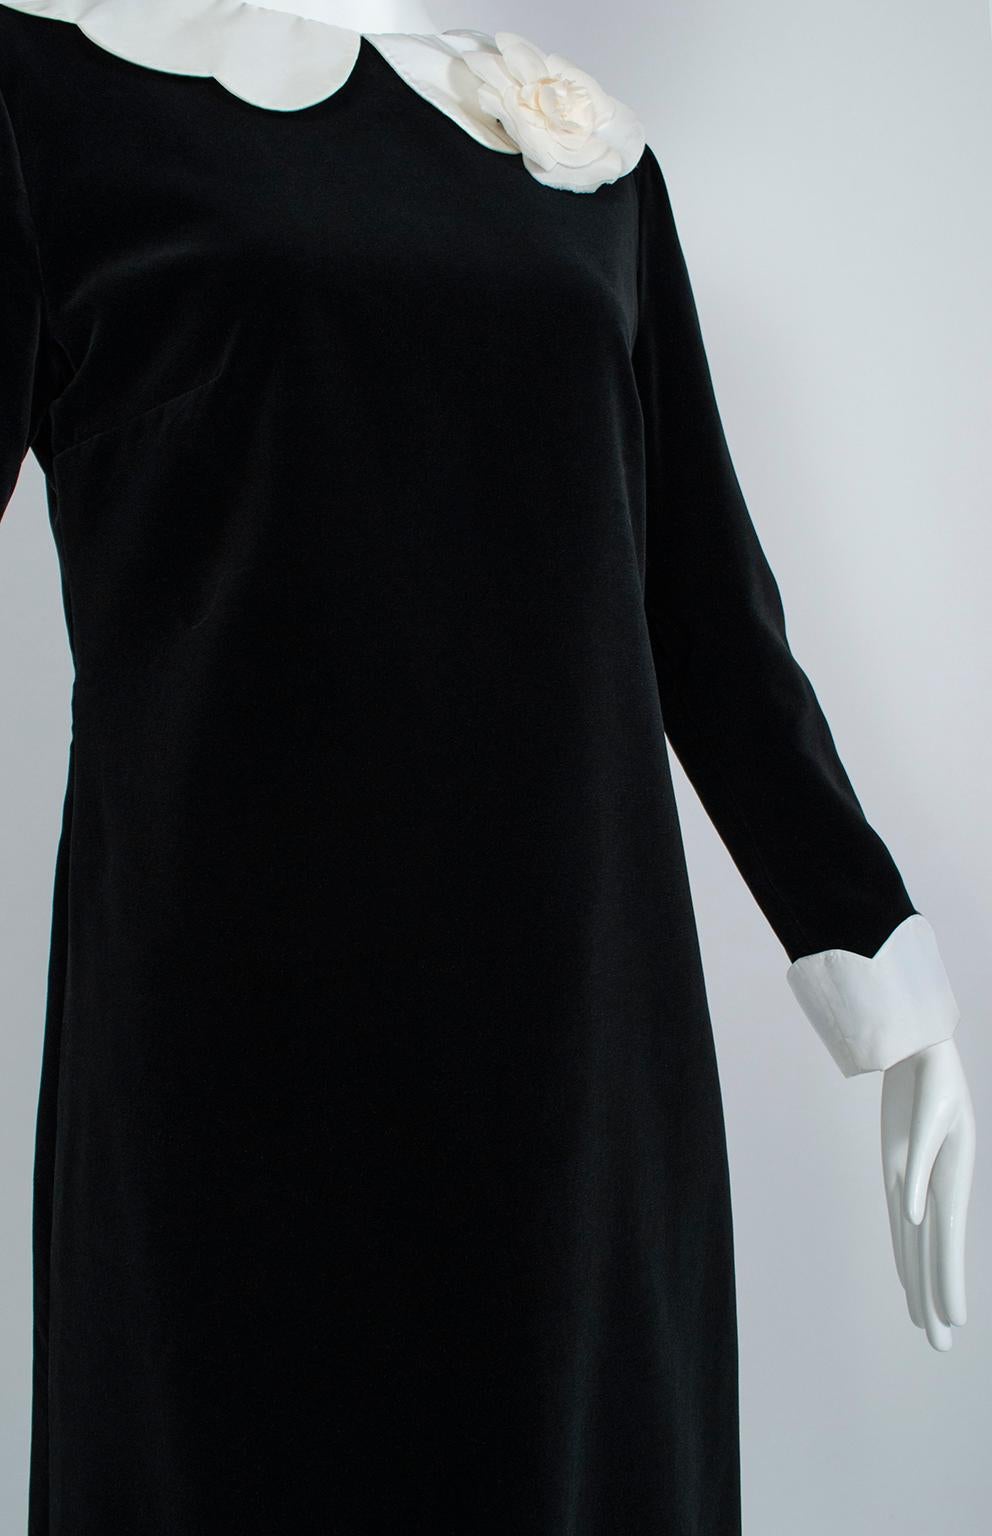 Black Chanel Camellia Shift Dress with Detachable Collar and Cuffs, 1960s